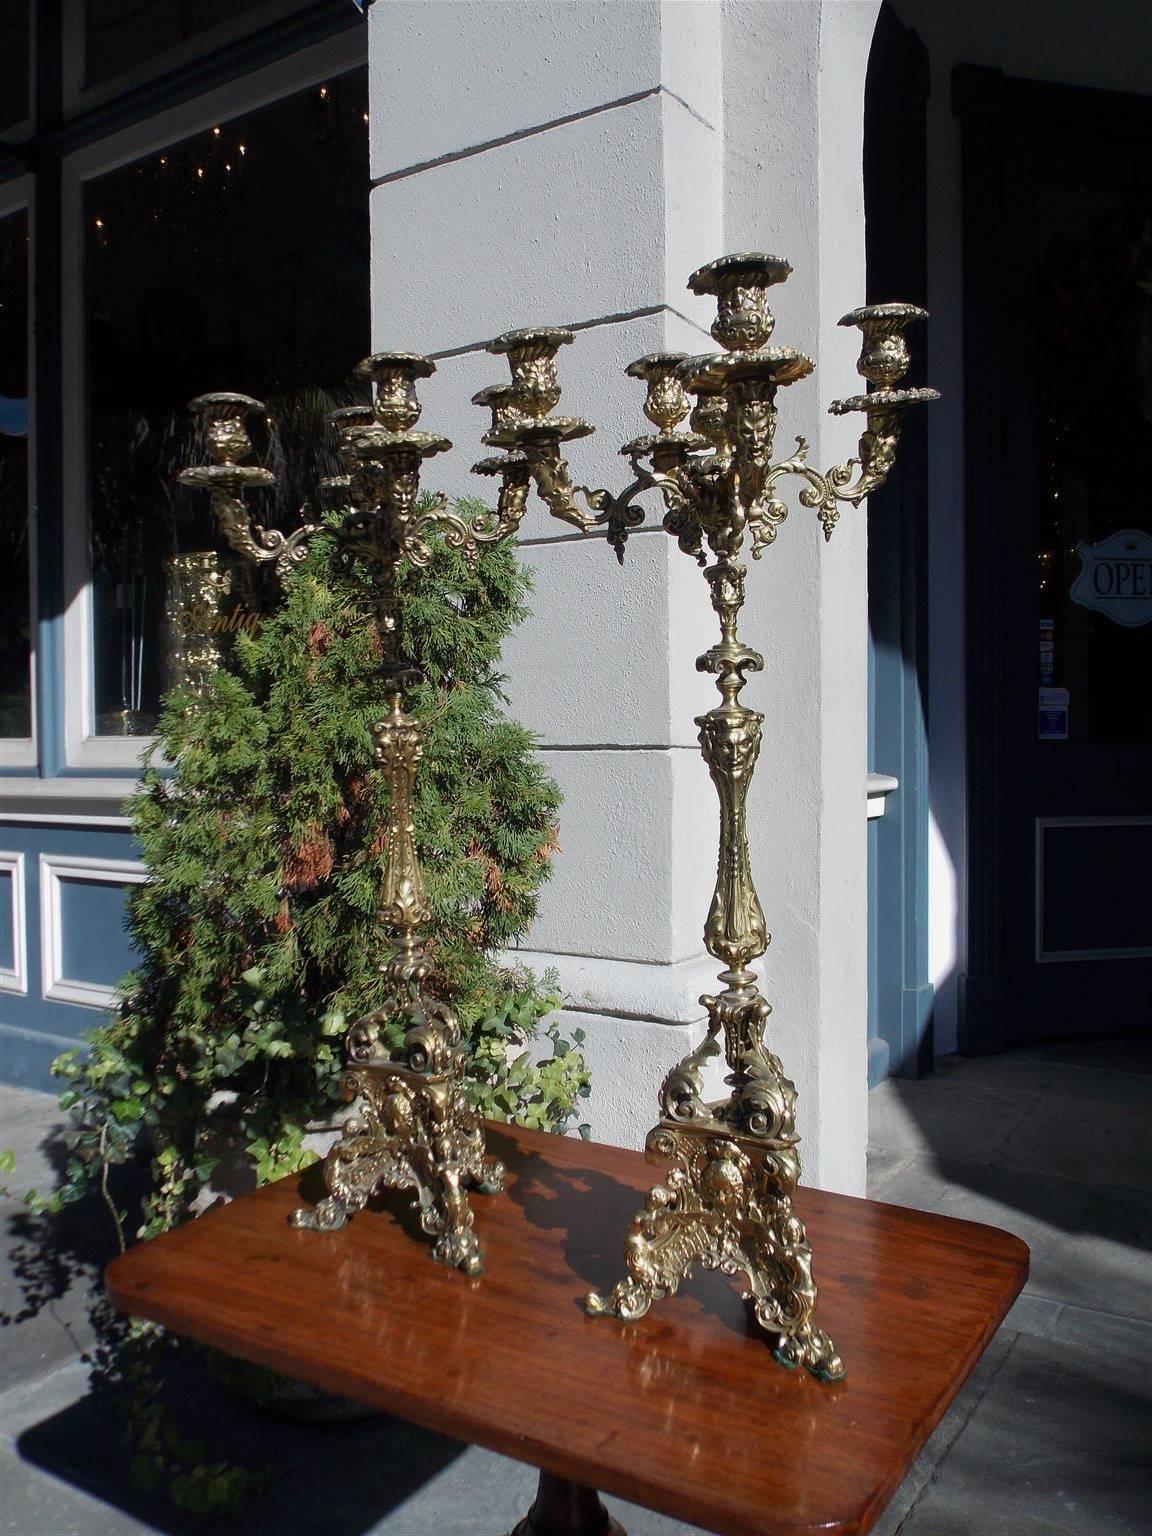 Cast Pair of Italian Bronze Figural and Floral Candelabras, Circa 1830 For Sale